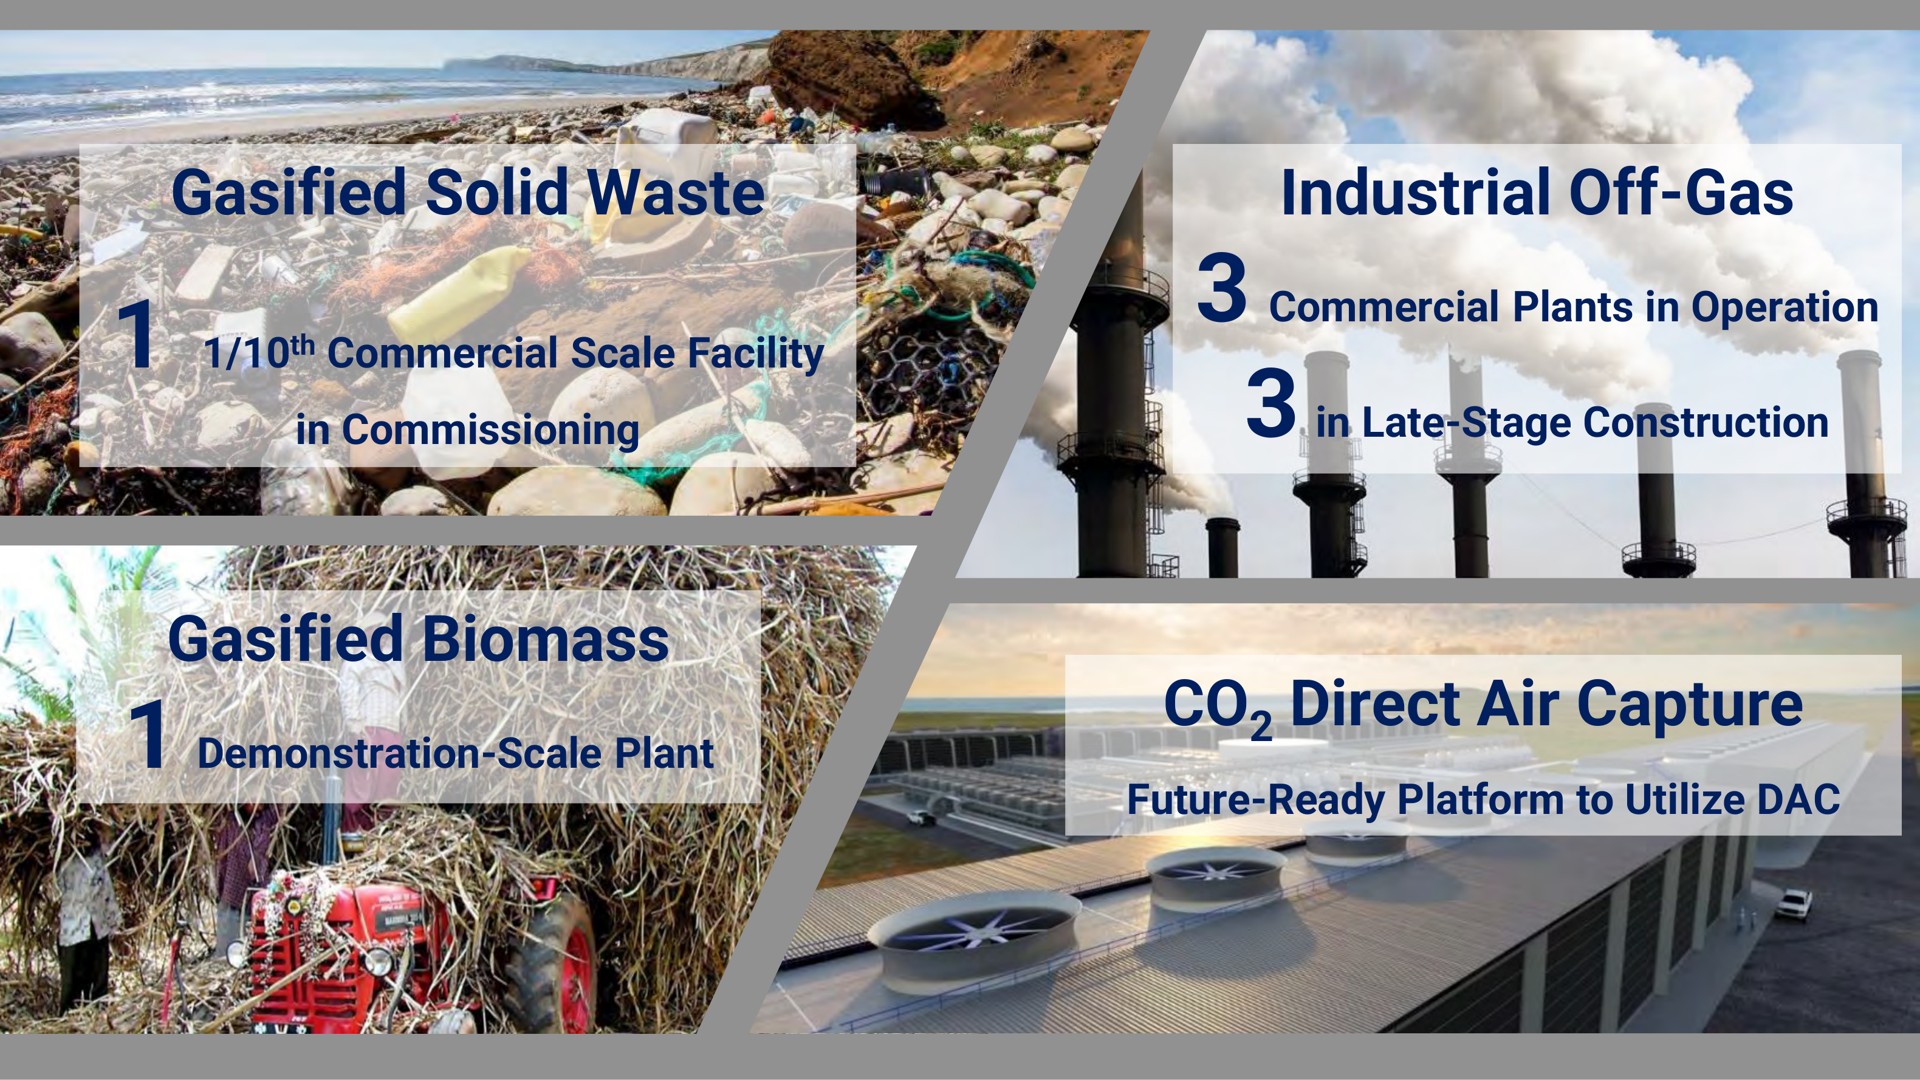 gasified solid waste commercial scale facility in commissioning industrial off gas commercial plants in operation in late stage construction gasified demonstration scale plant direct air capture future ready platform to utilize i | LanzaTech